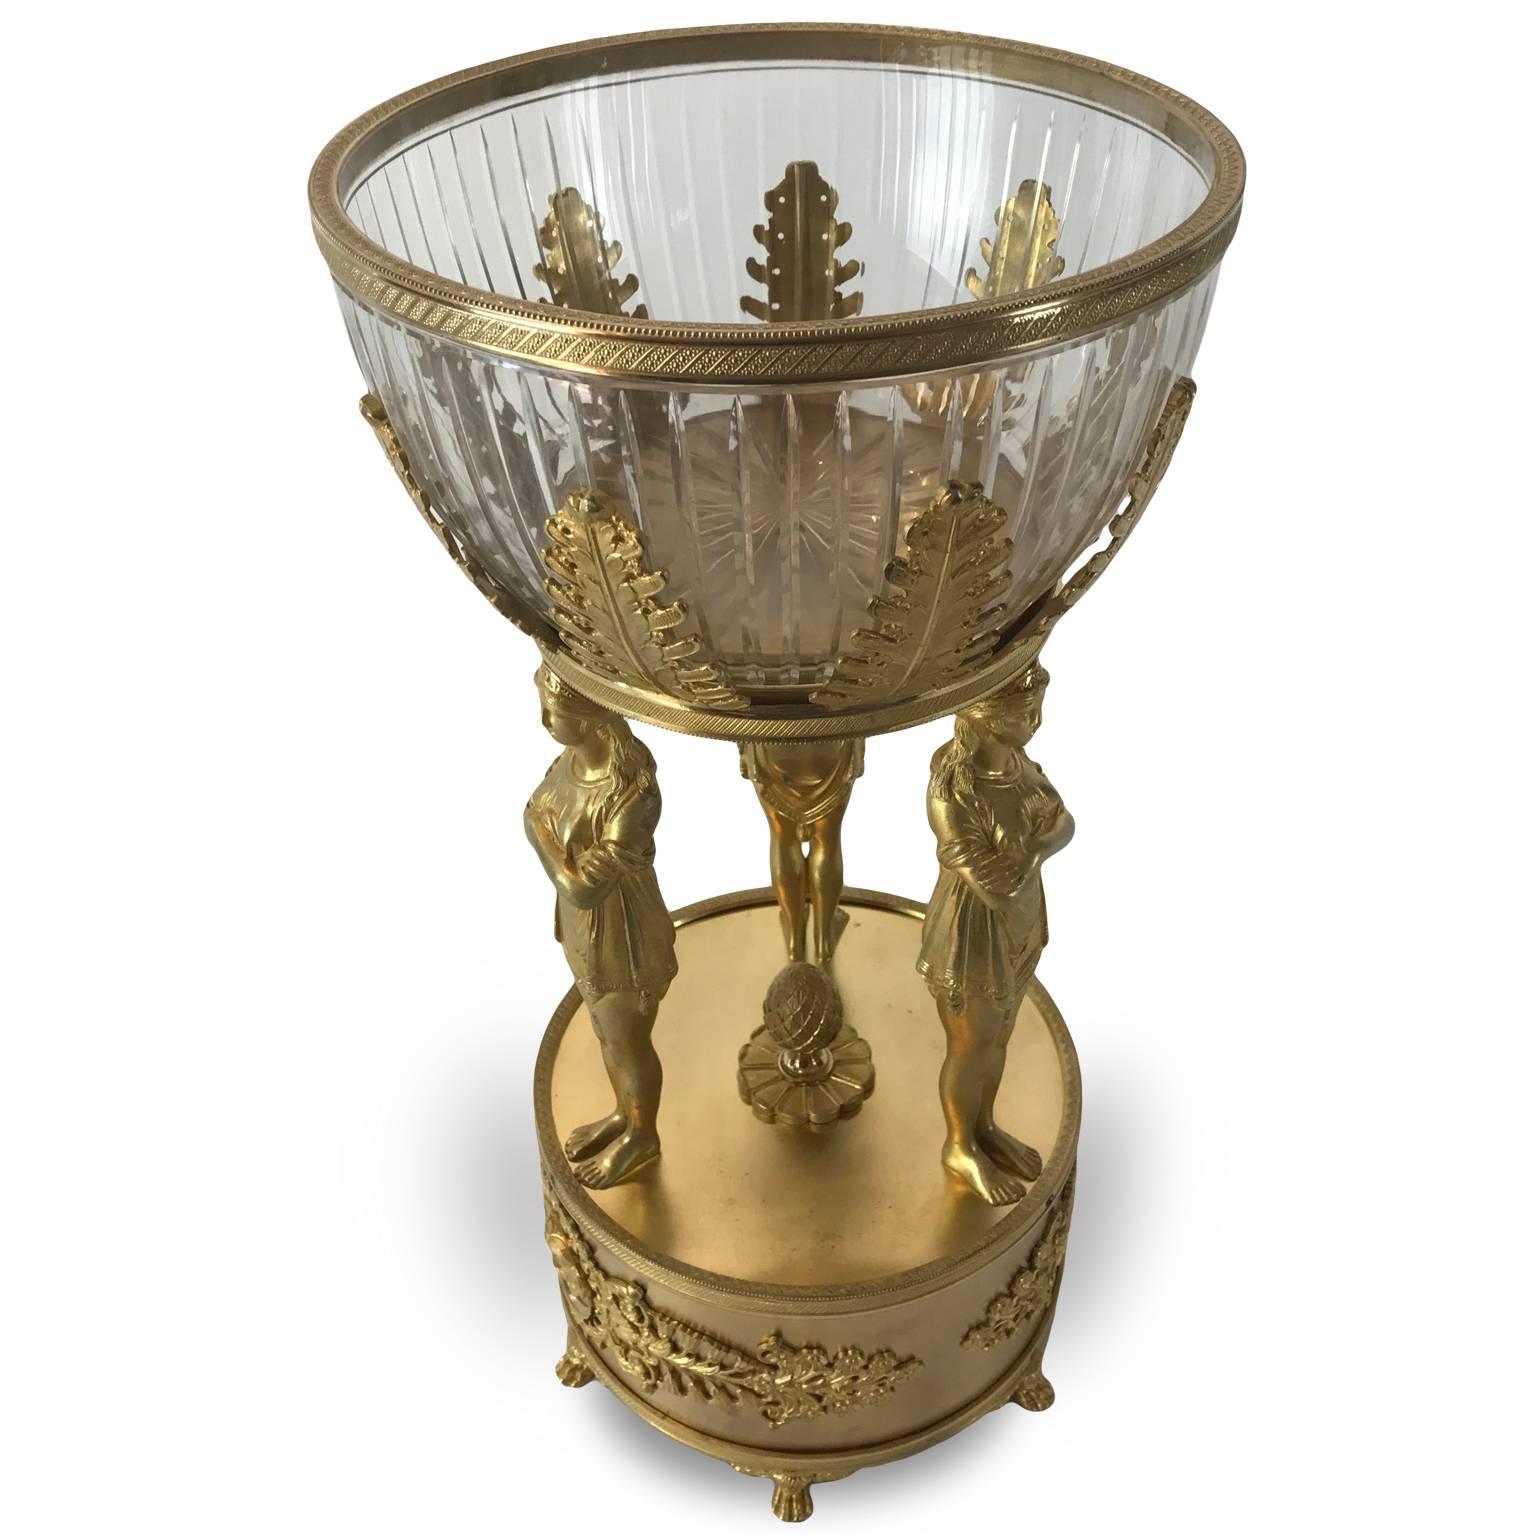 A magnificent early 19th century Empire gilt bronze figural centrepiece of French origin, dating back to circa 1820, with an original Baccarat crystal basket surrounded by palmettes, above three supporting caryatids, three standing female figures on